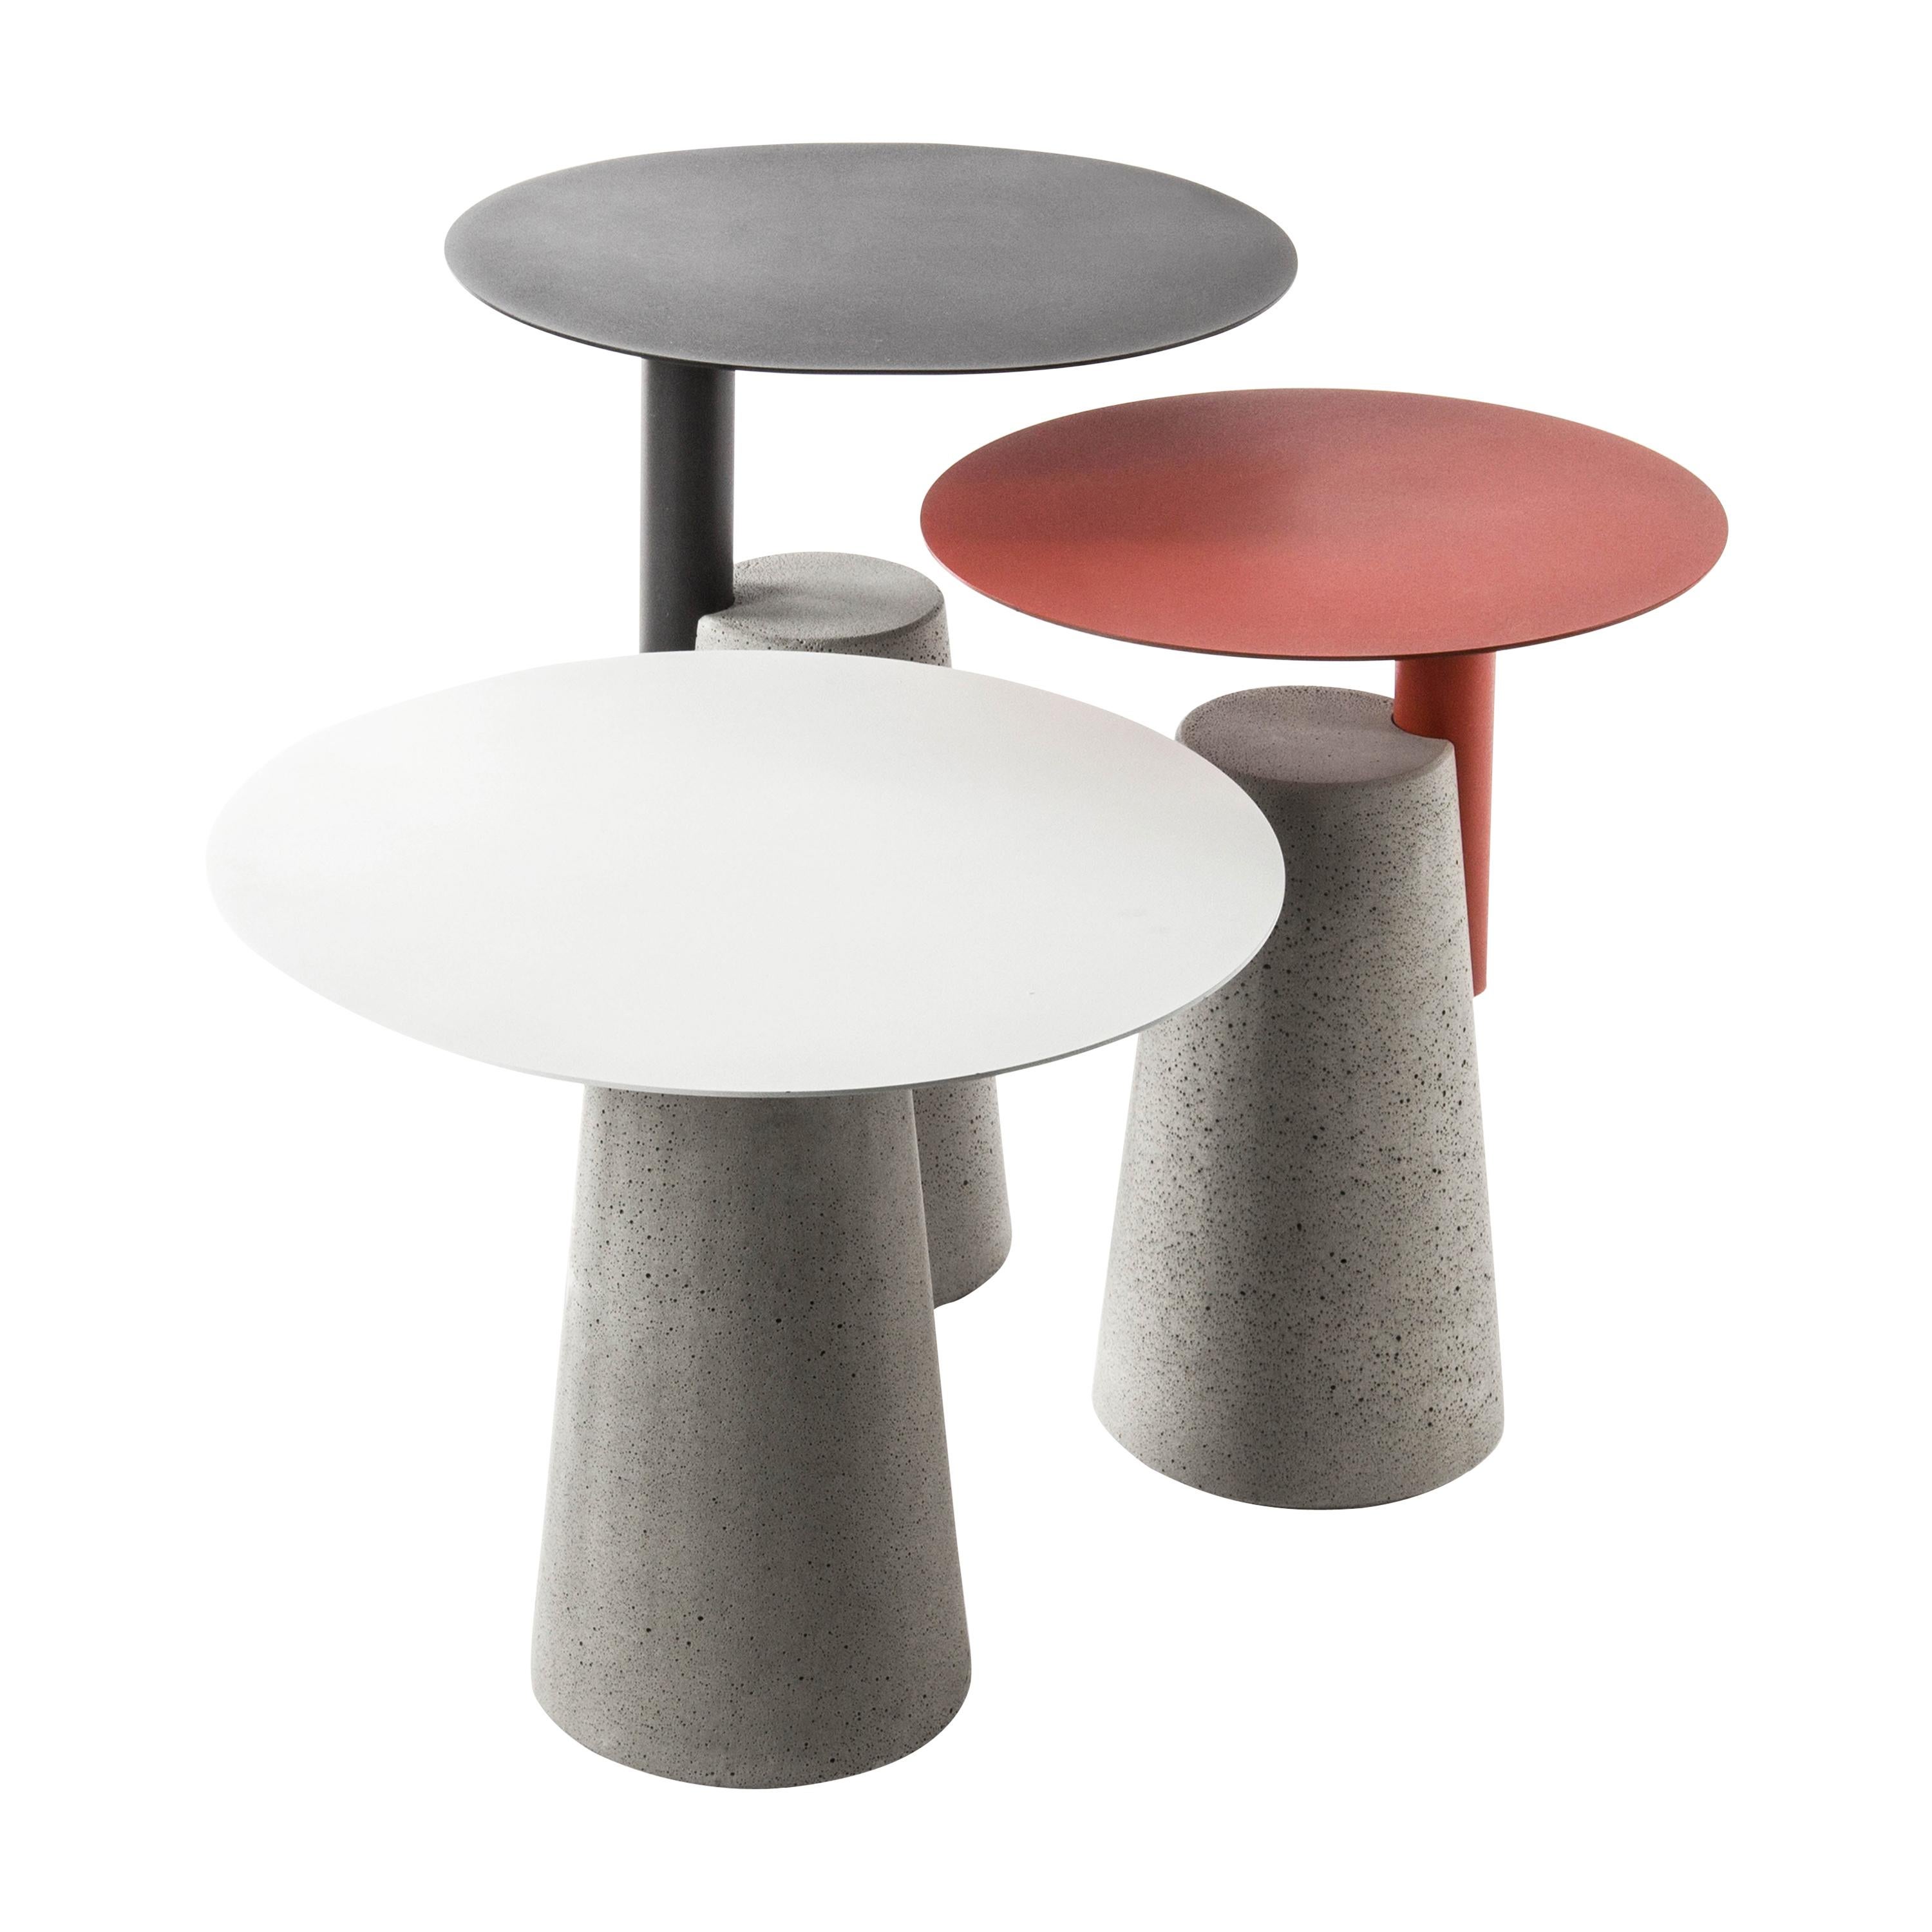 Side Table 'Bai' Made of Concrete and Steel '+Colors' '+Sizes'